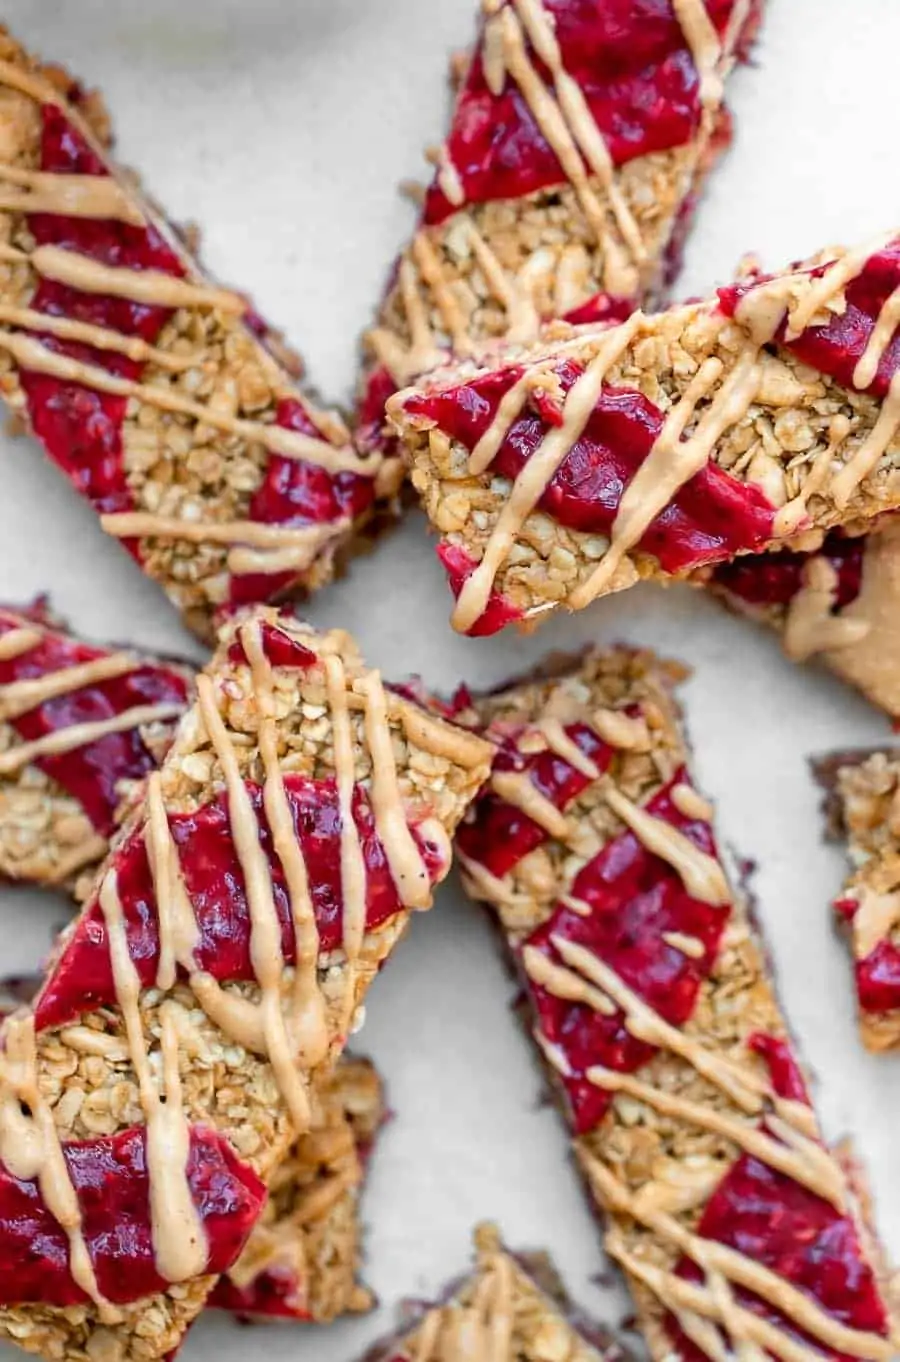 No bake granola bars with peanut butter and jelly on top.